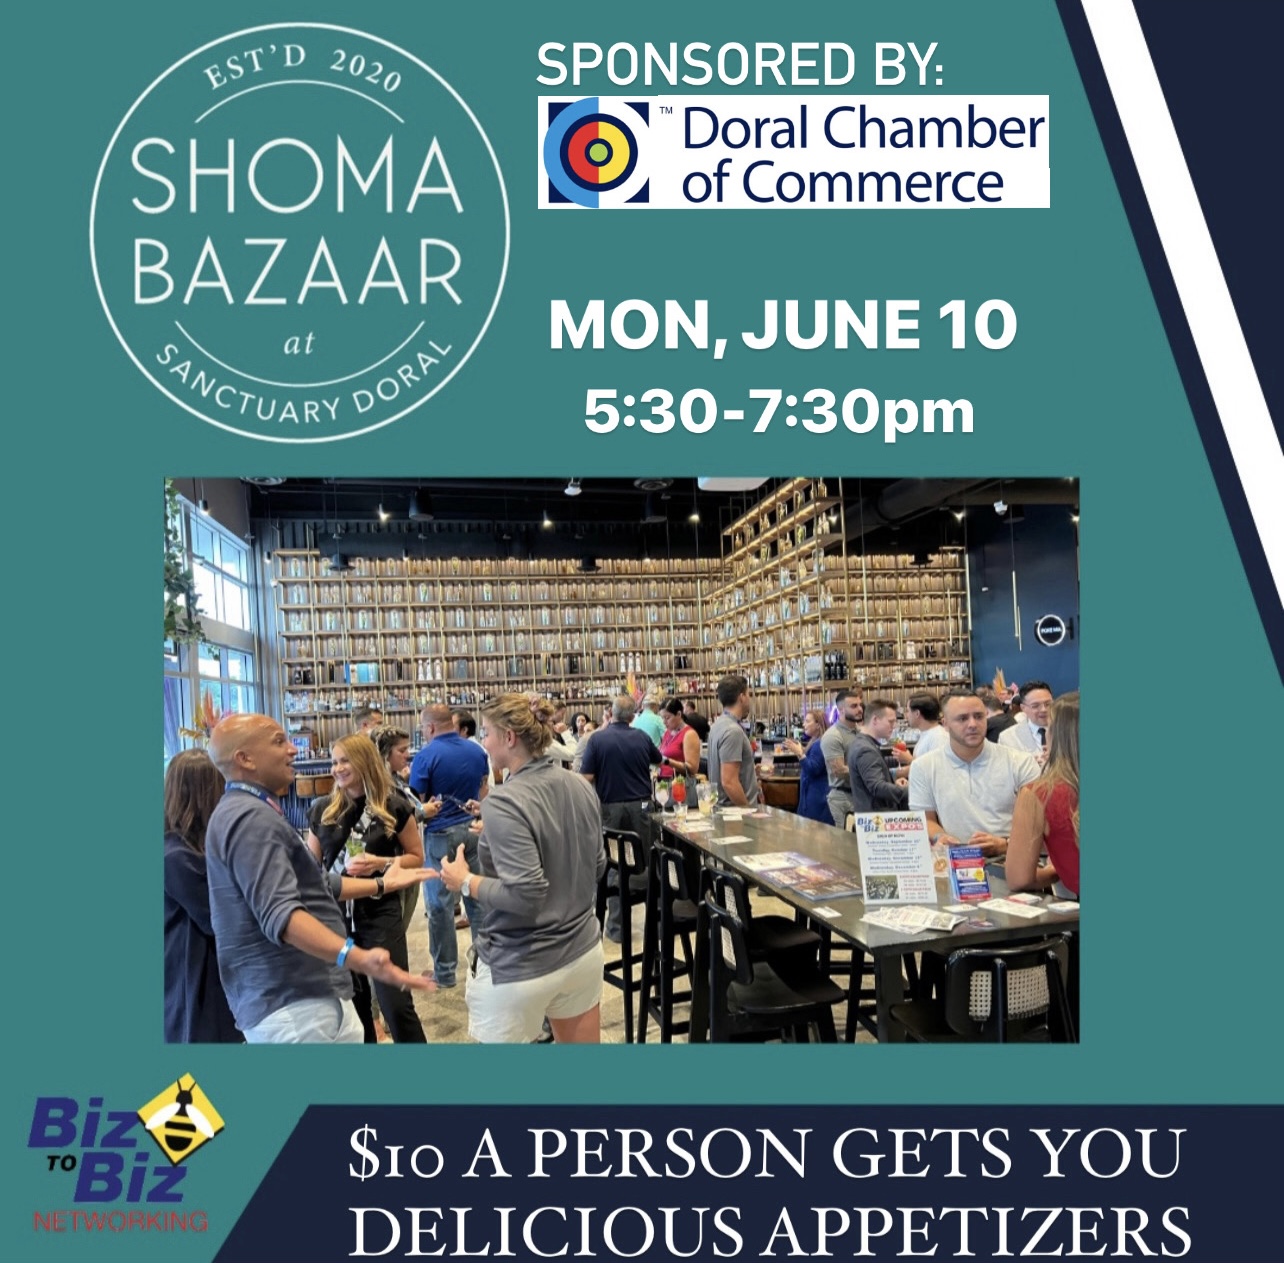 Biz To Biz Networking Networking at Shoma Bazaar DoralJune 10th….we’re BACK in Doral… at Shoma Bazaar for another Exclusive Networking Event!